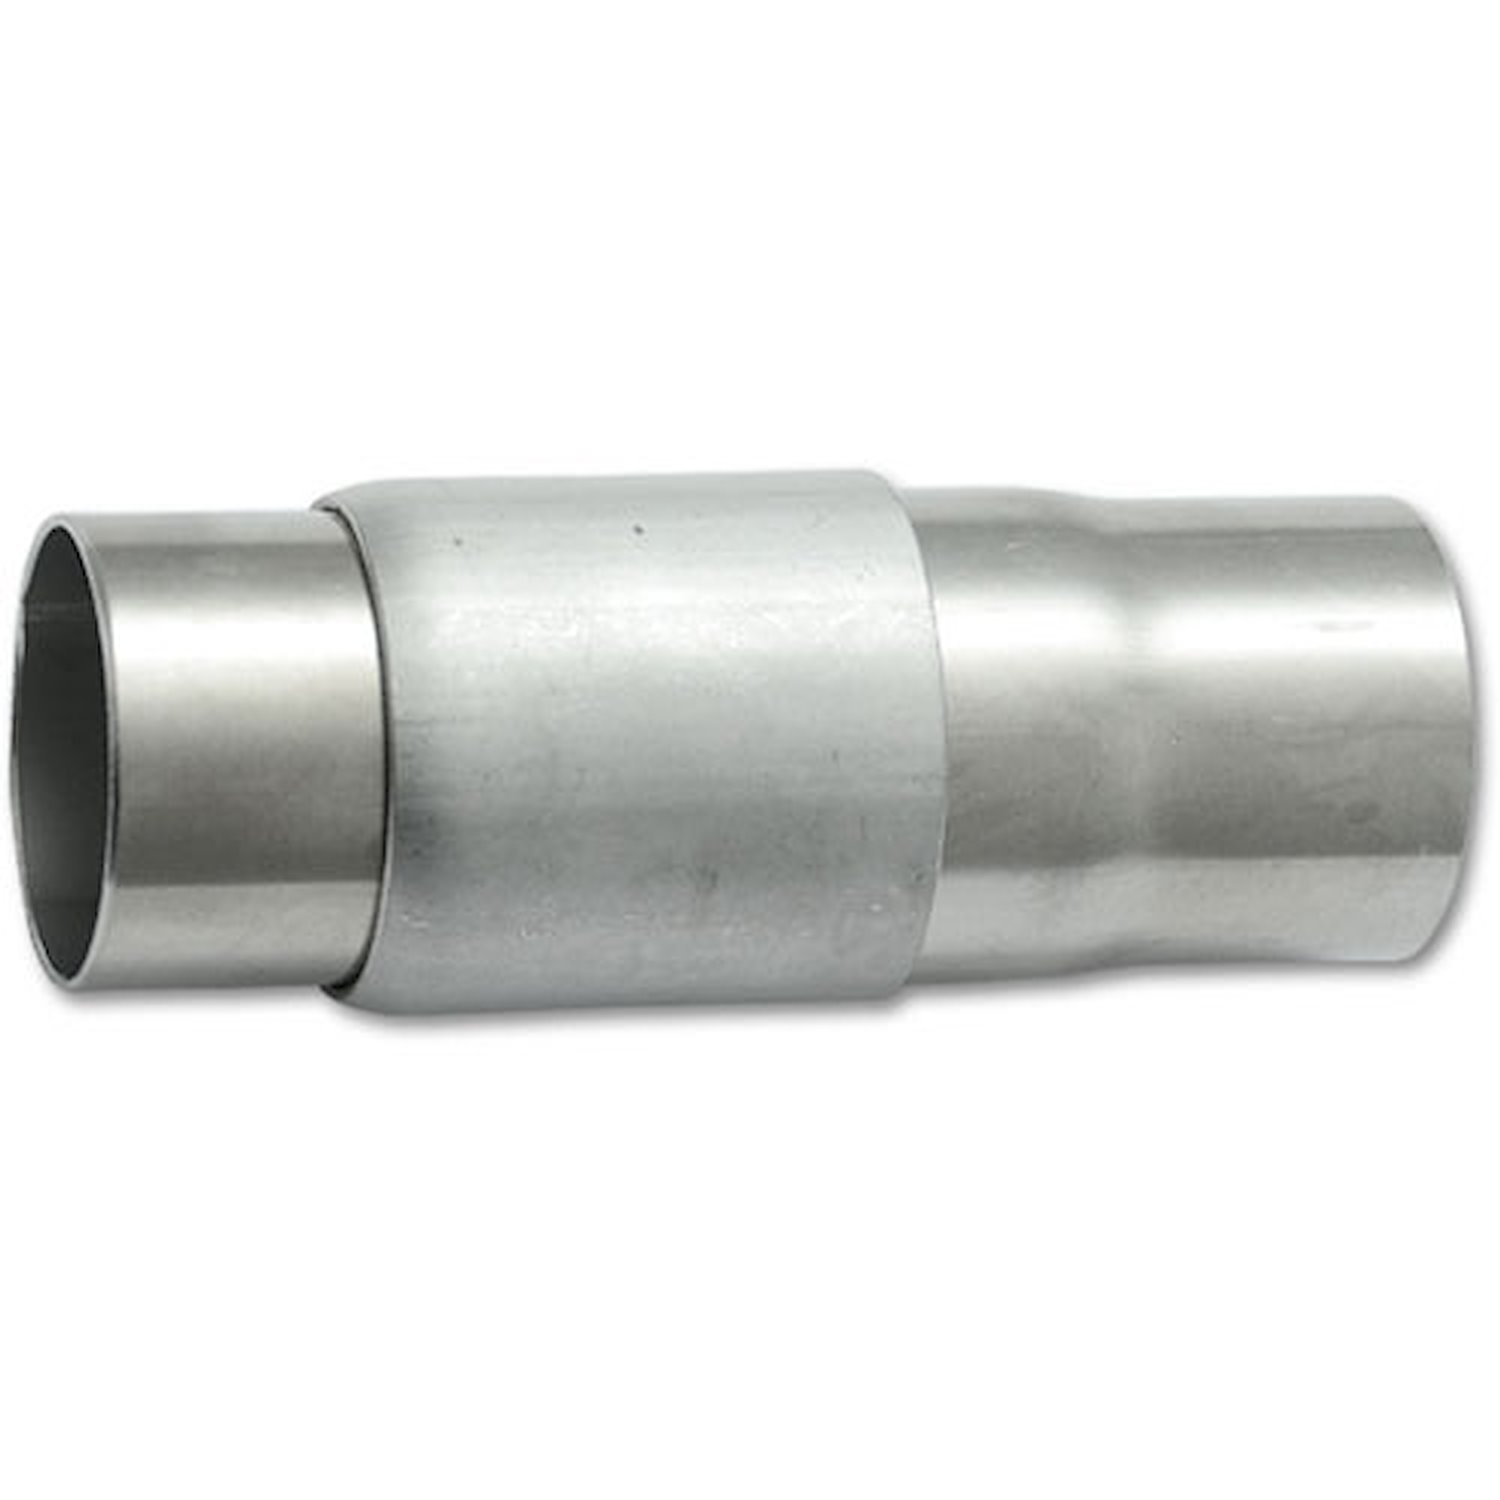 Double Slip Joint Fitting For use with 2-1/2" O.D. Tubing